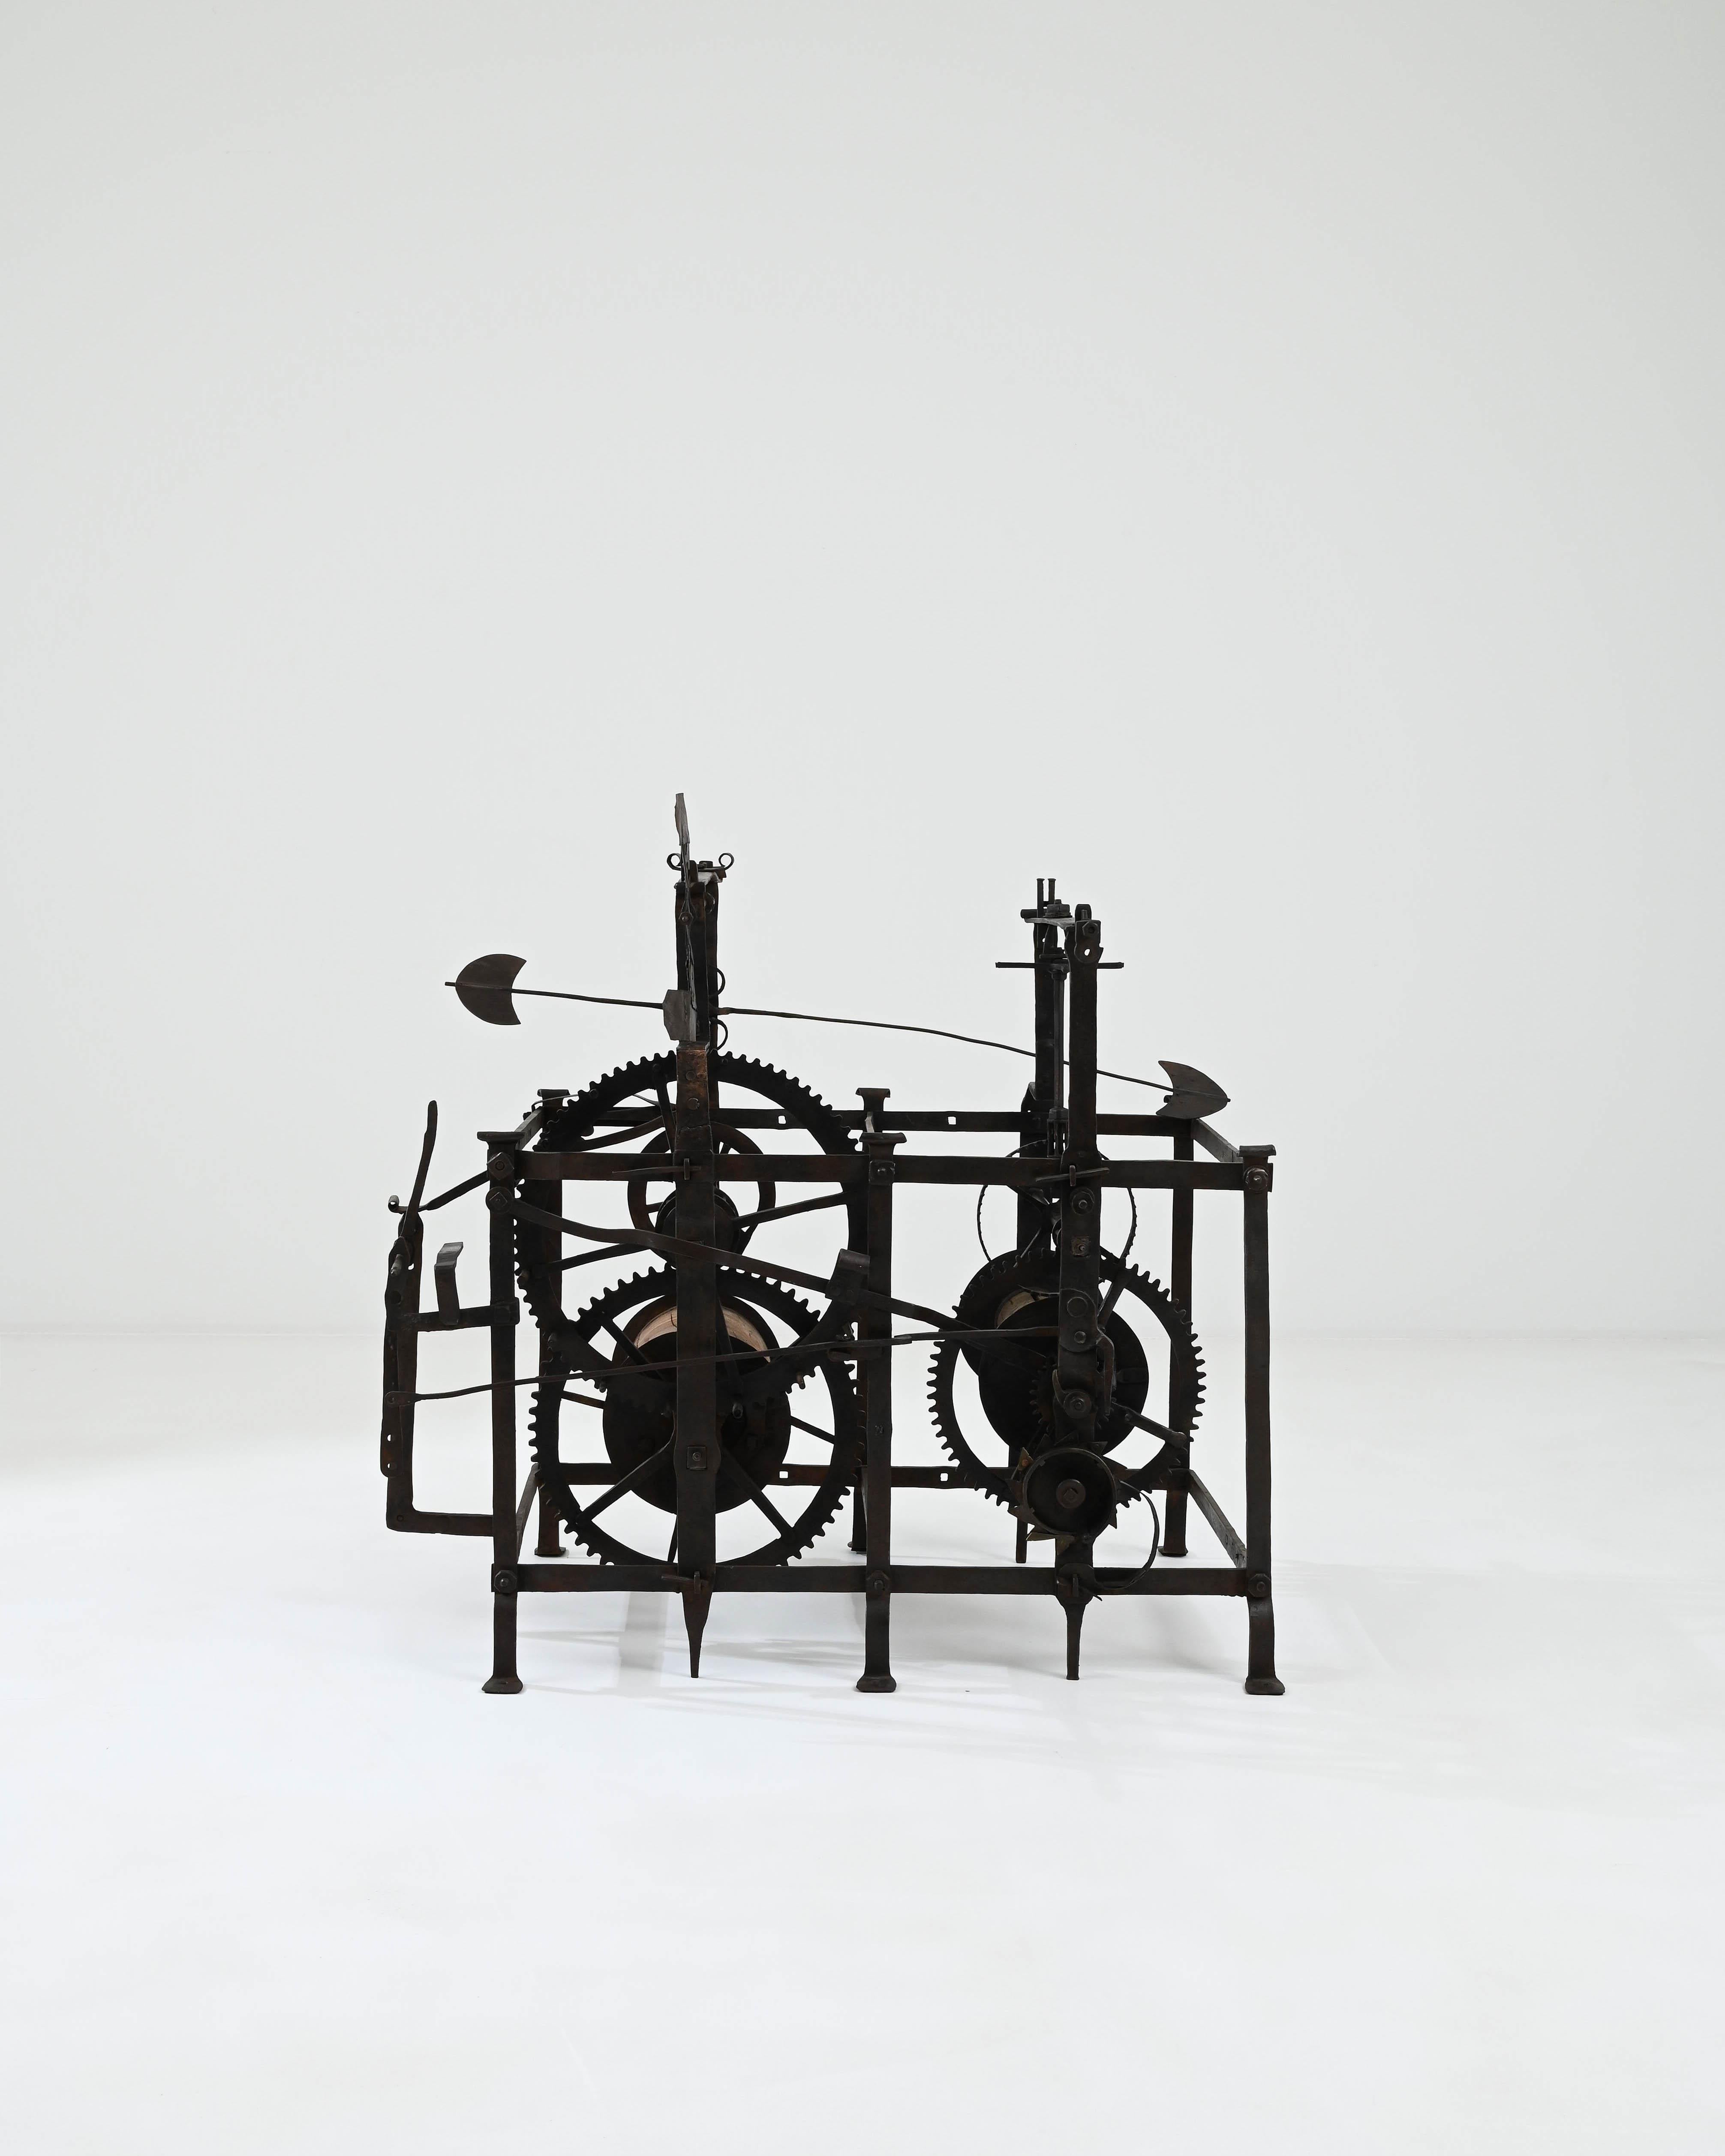 The sculptural silhouette of this antique iron clock mechanism draws the eye and ignites the imagination. Made in France in the 1700s, this piece offers a slice of history: one of the inventions that ushered in the Industrial Age, the cutting edge